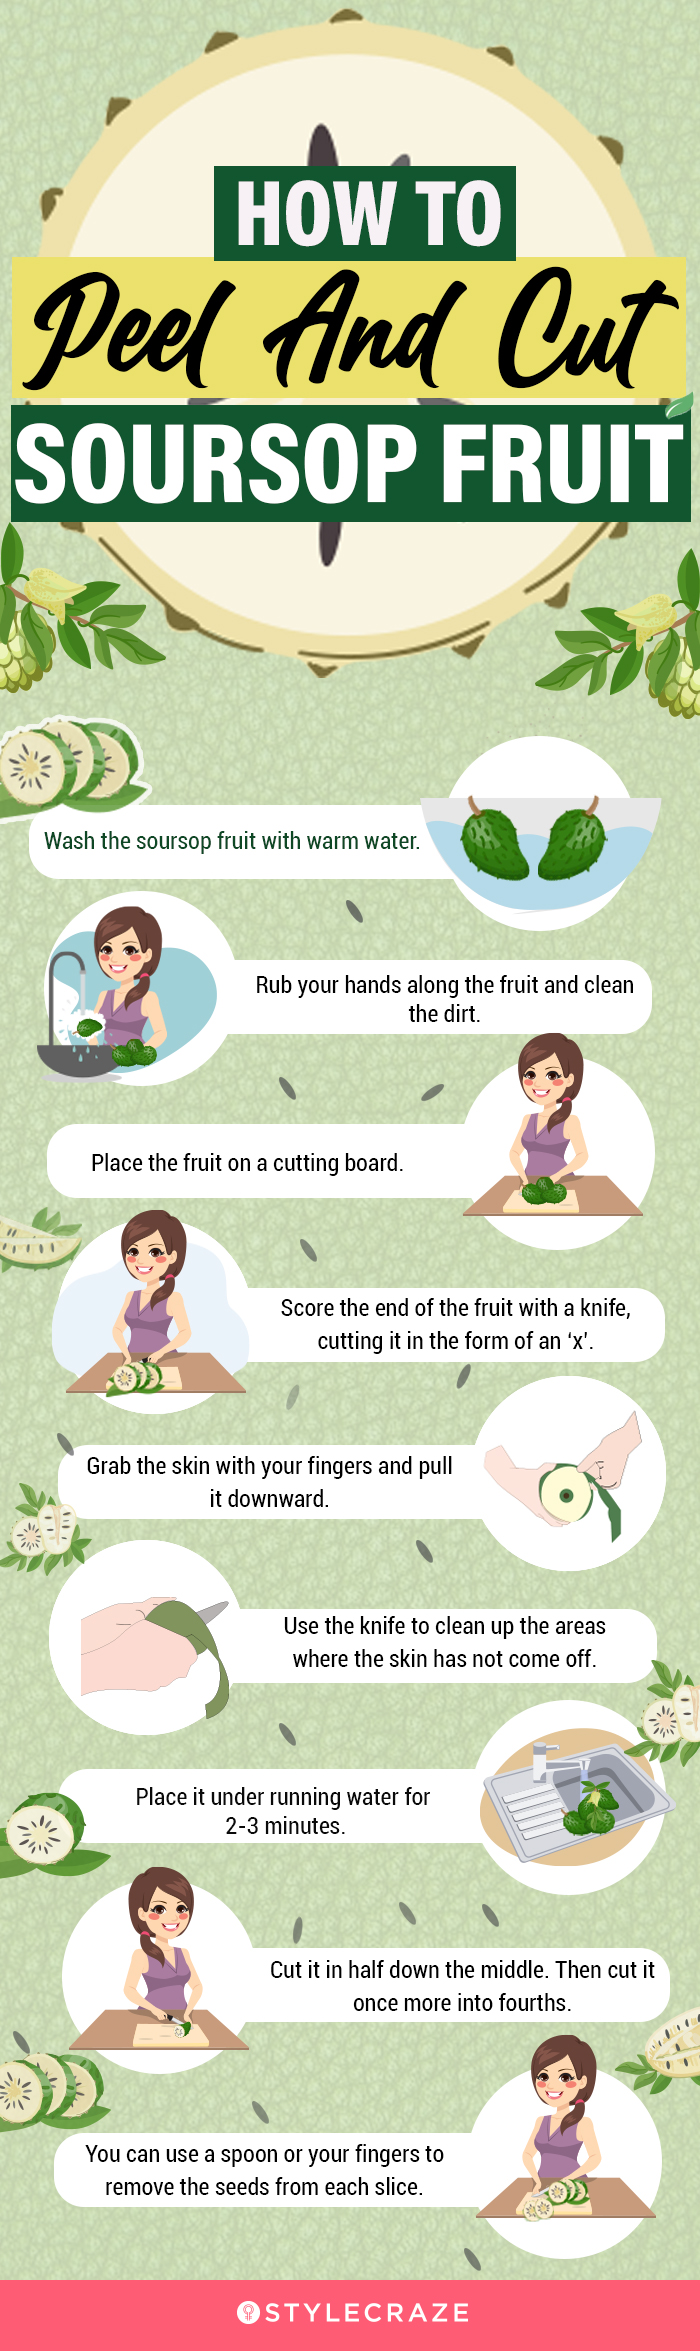 how to peel and cut soursop fruit (infographic)